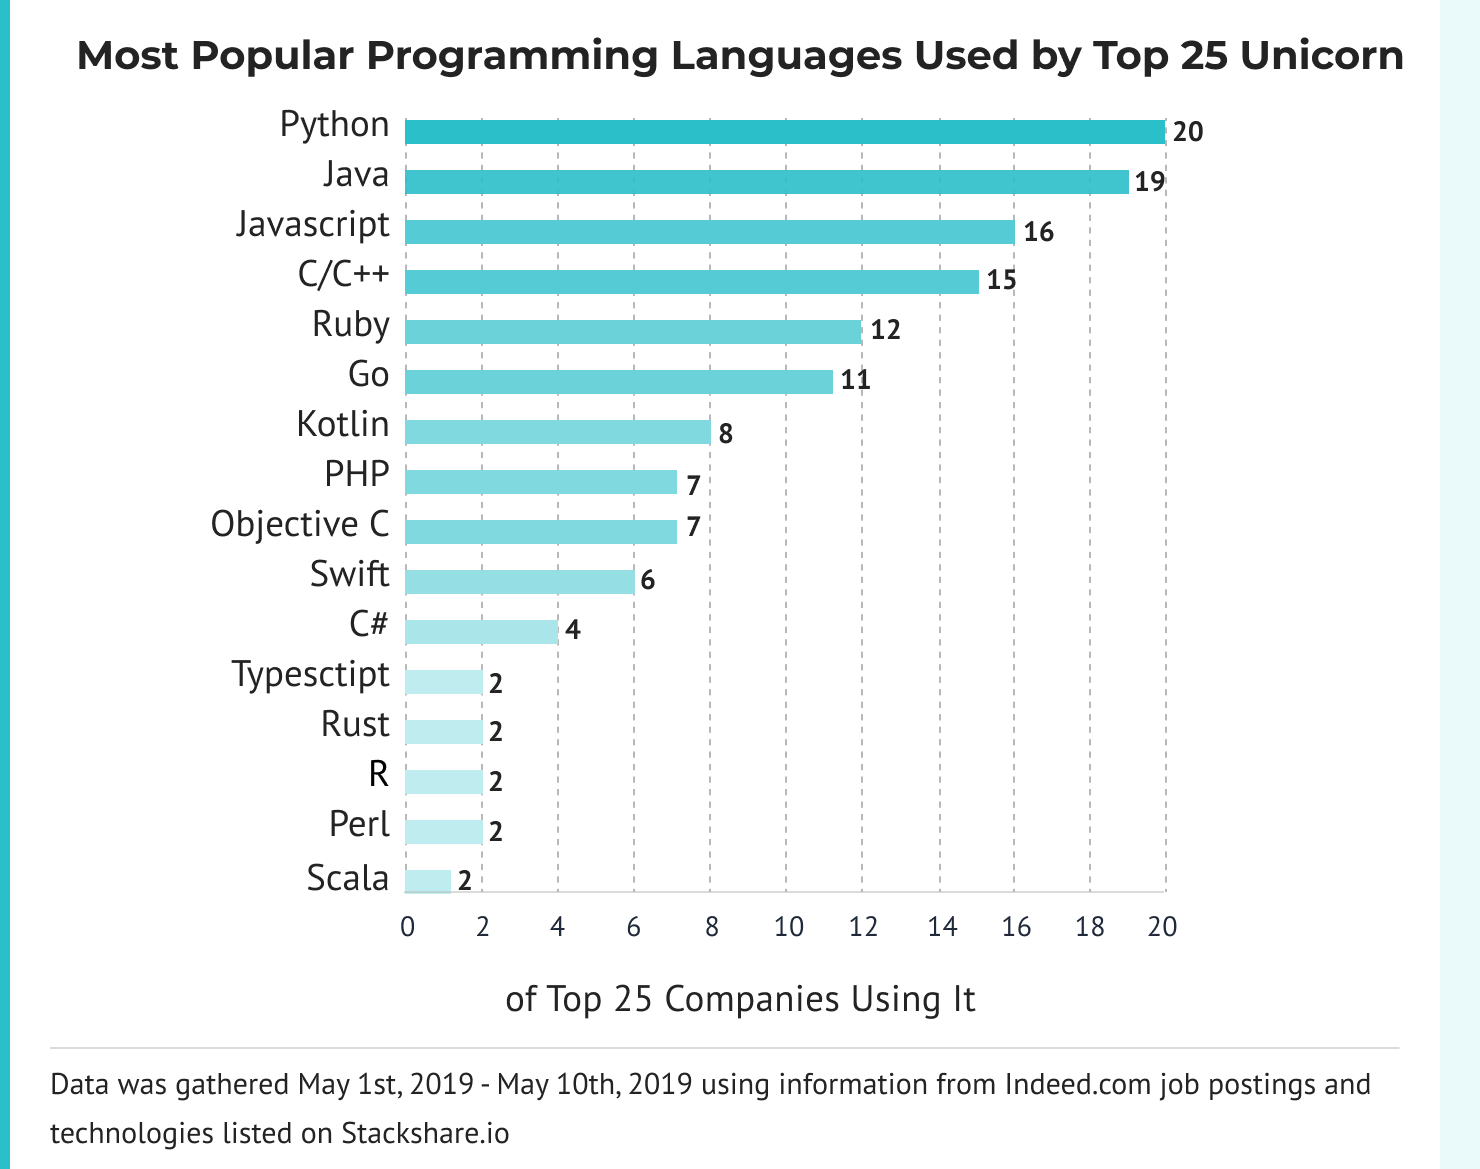 The most popular programming languages by Top 25 Unicorn